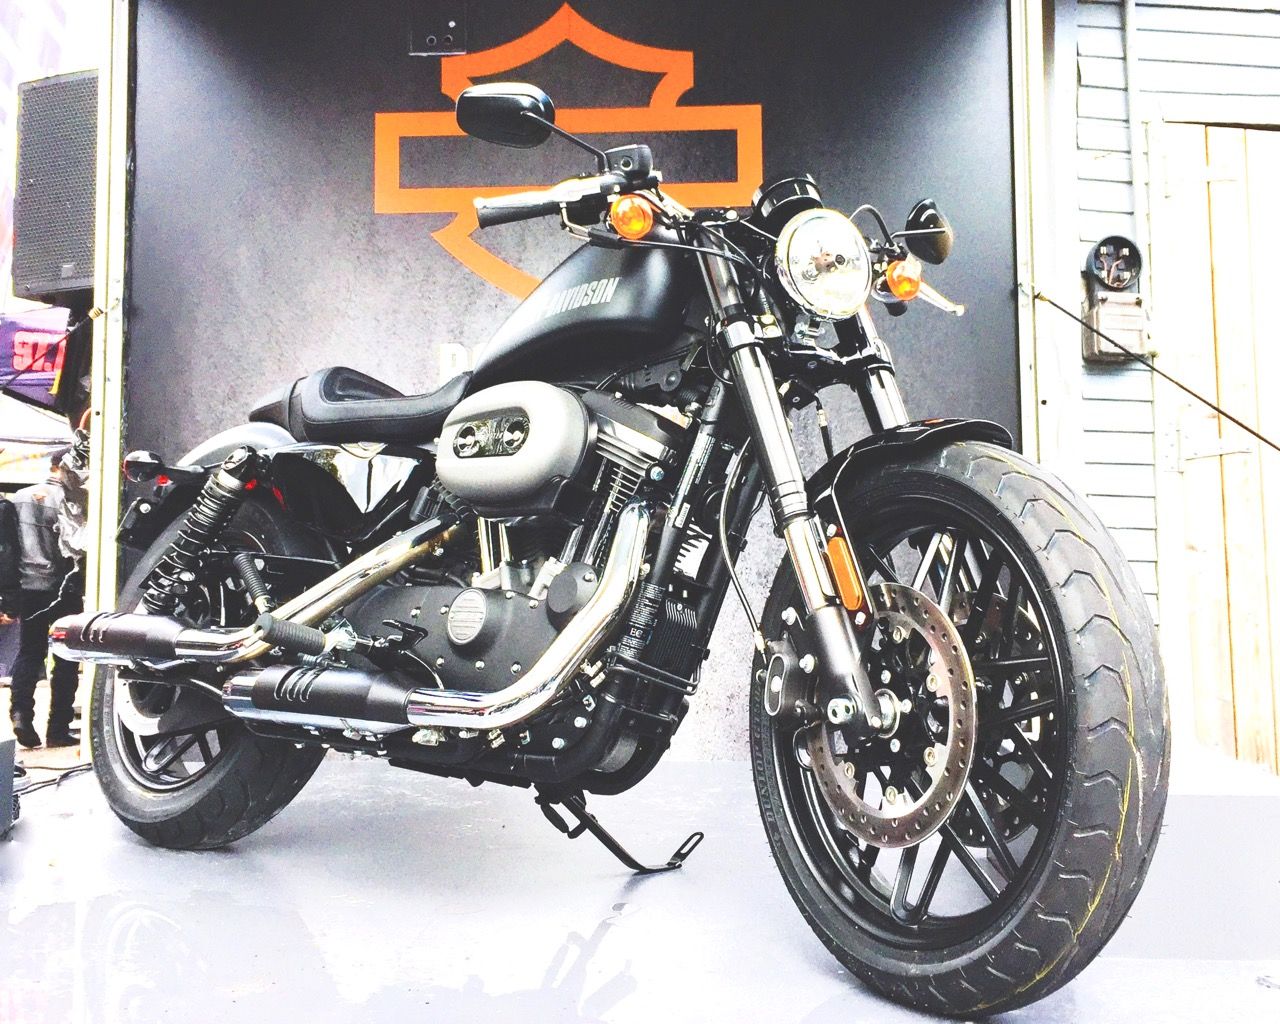 2016 Harley-Davidson Sportster Roadster launches in Canada.